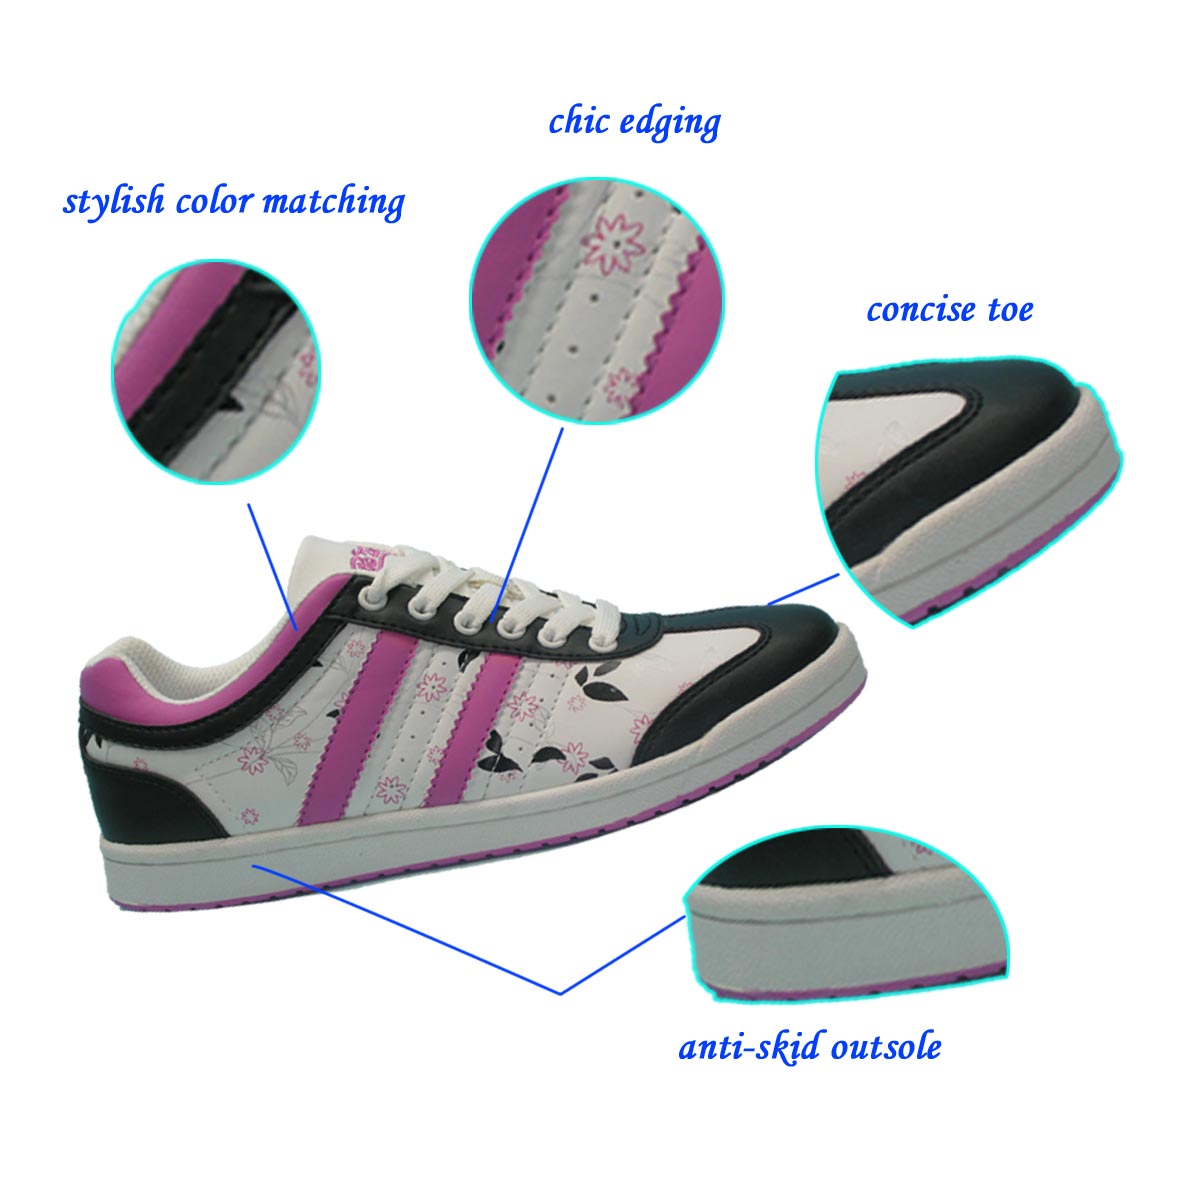 New Brand Exported Elegant Skate/Skateboard Shoes Rubble outsole and PU upper for Woman